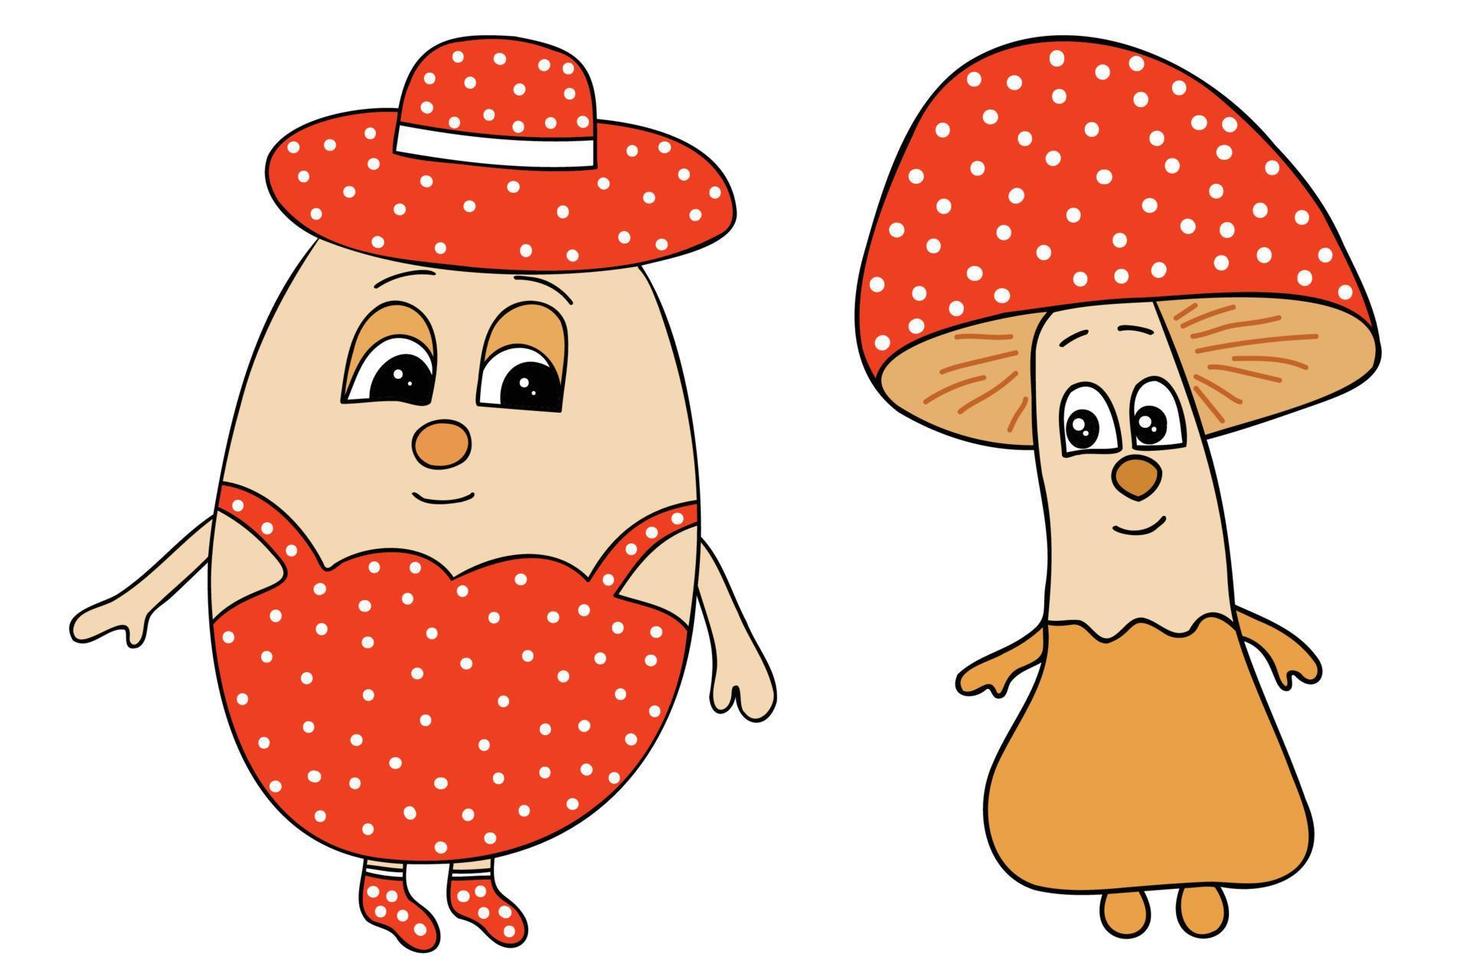 A poisonous mushroom with a face and a cloth mushroom, designed for books, cards, Christmas, clothing printing, etc. vector